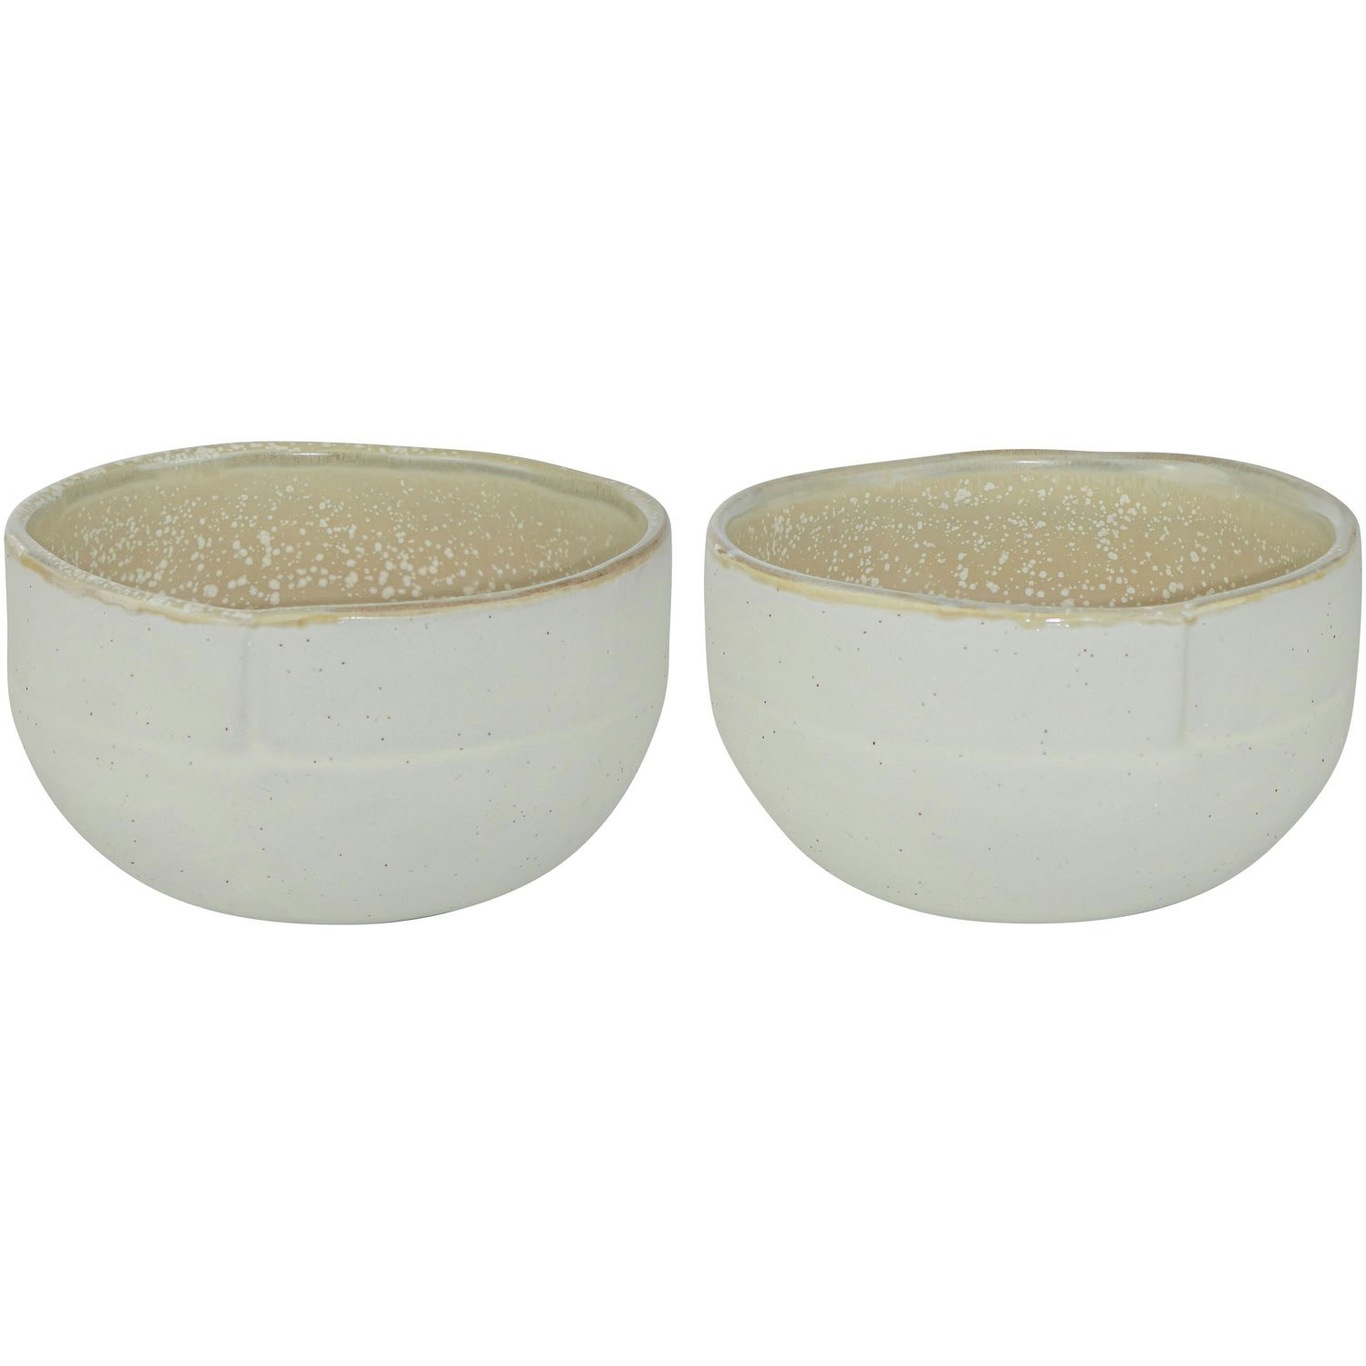 SAND GRAIN Bowl 2-pack Small, Straw